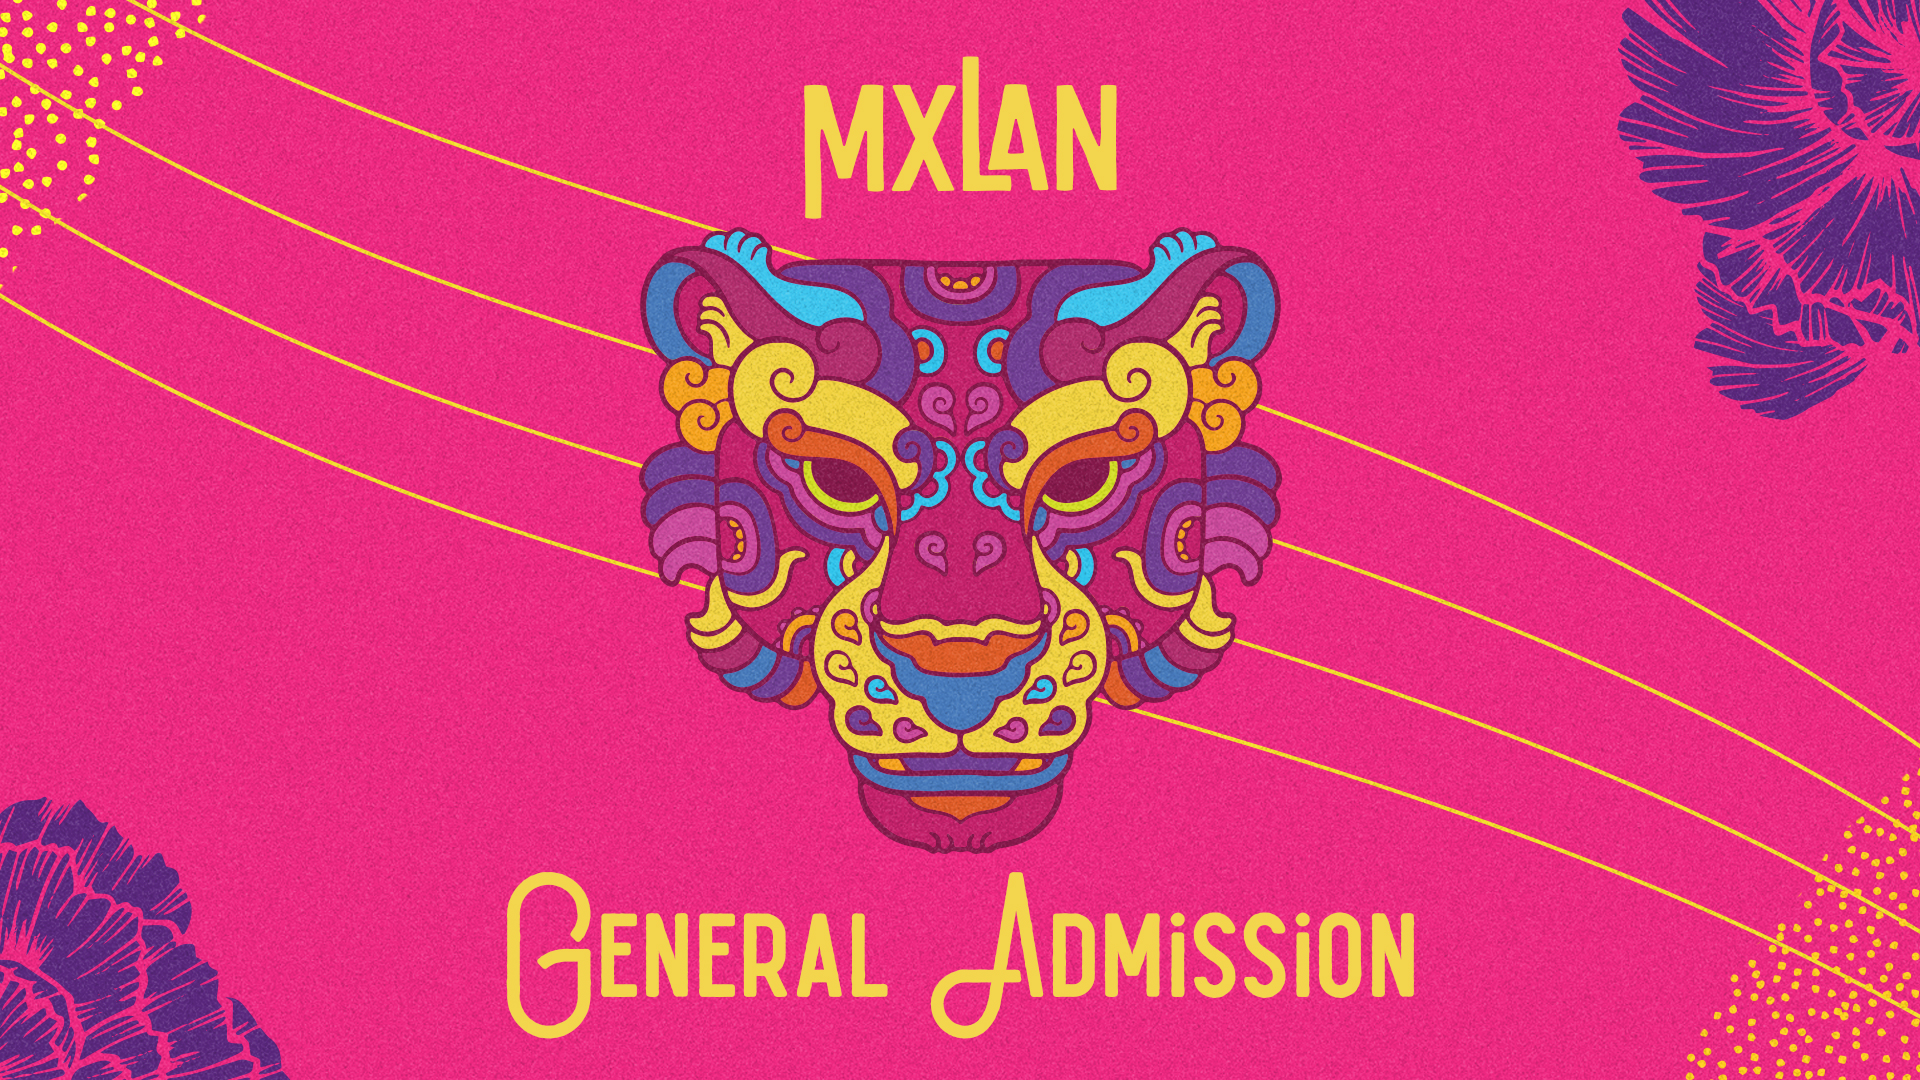 mxlan sabor a mexico festival mcallen latino latinx music arts best fesitval in texas acl south by south west coachella rio grande valley south padre island brownsville indie best latino festival in us breakthrough stage